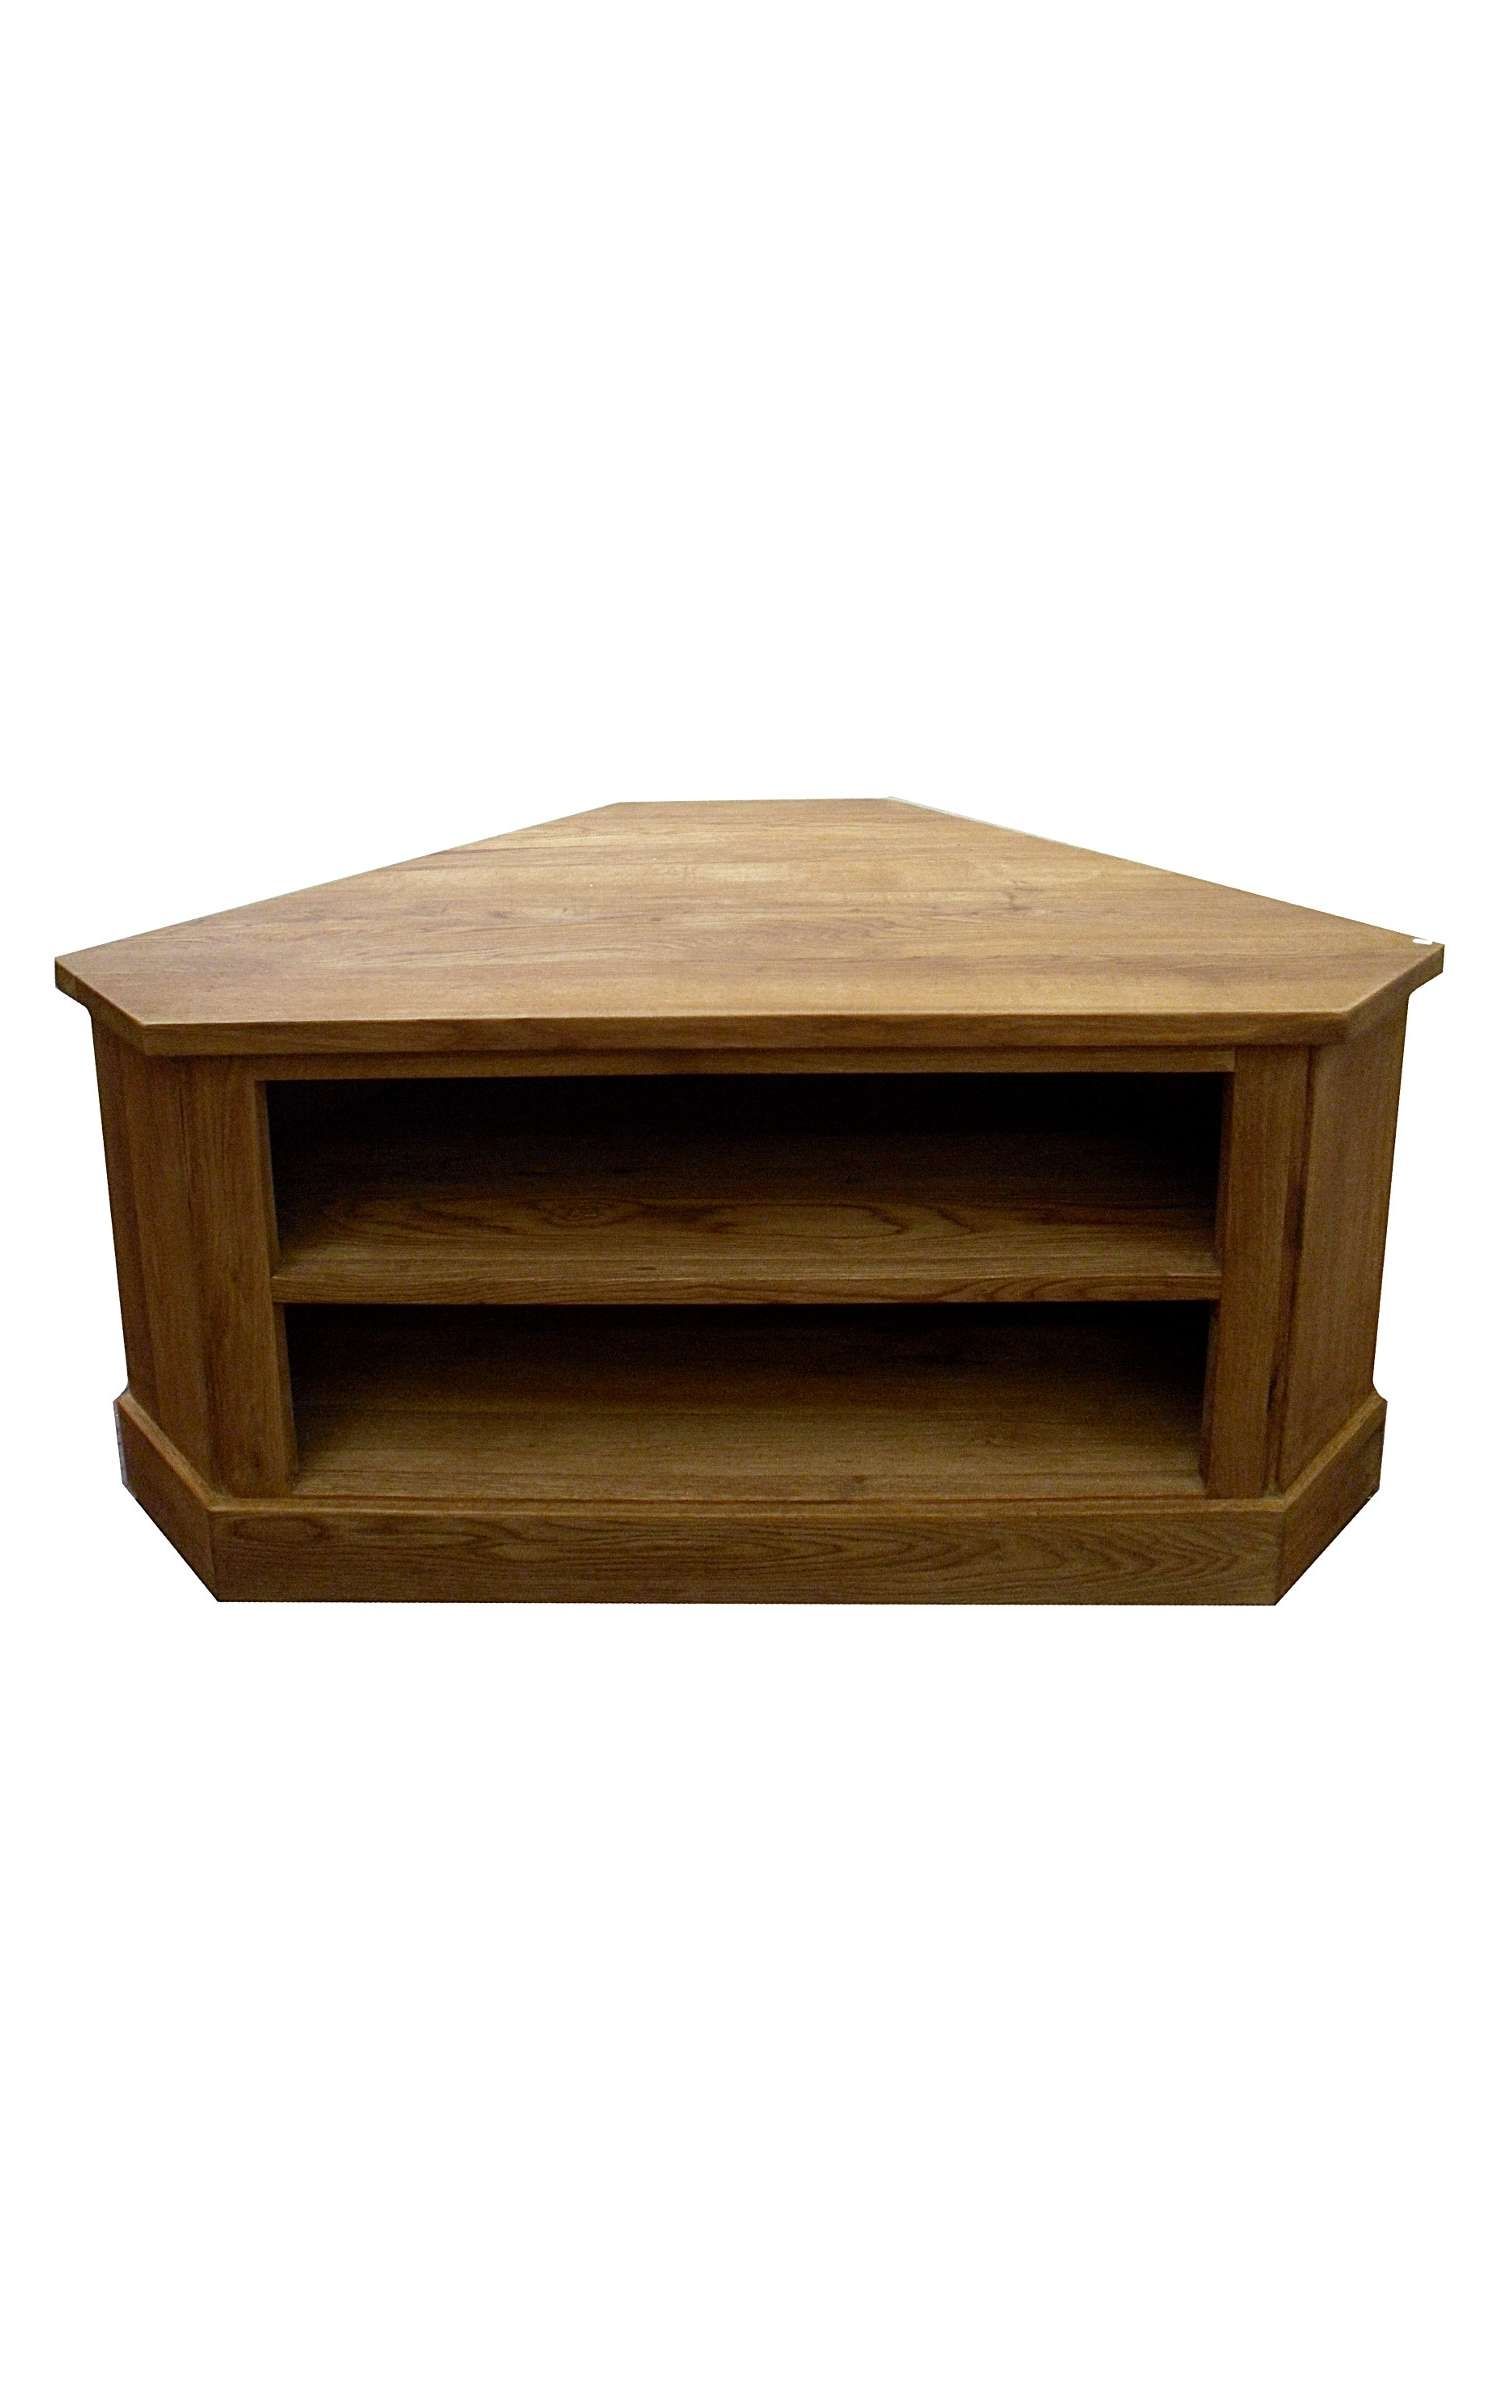 Small Wooden Corner Tv Stand Console Cabinet With Fireplace And For Corner Wooden Tv Stands (View 6 of 15)